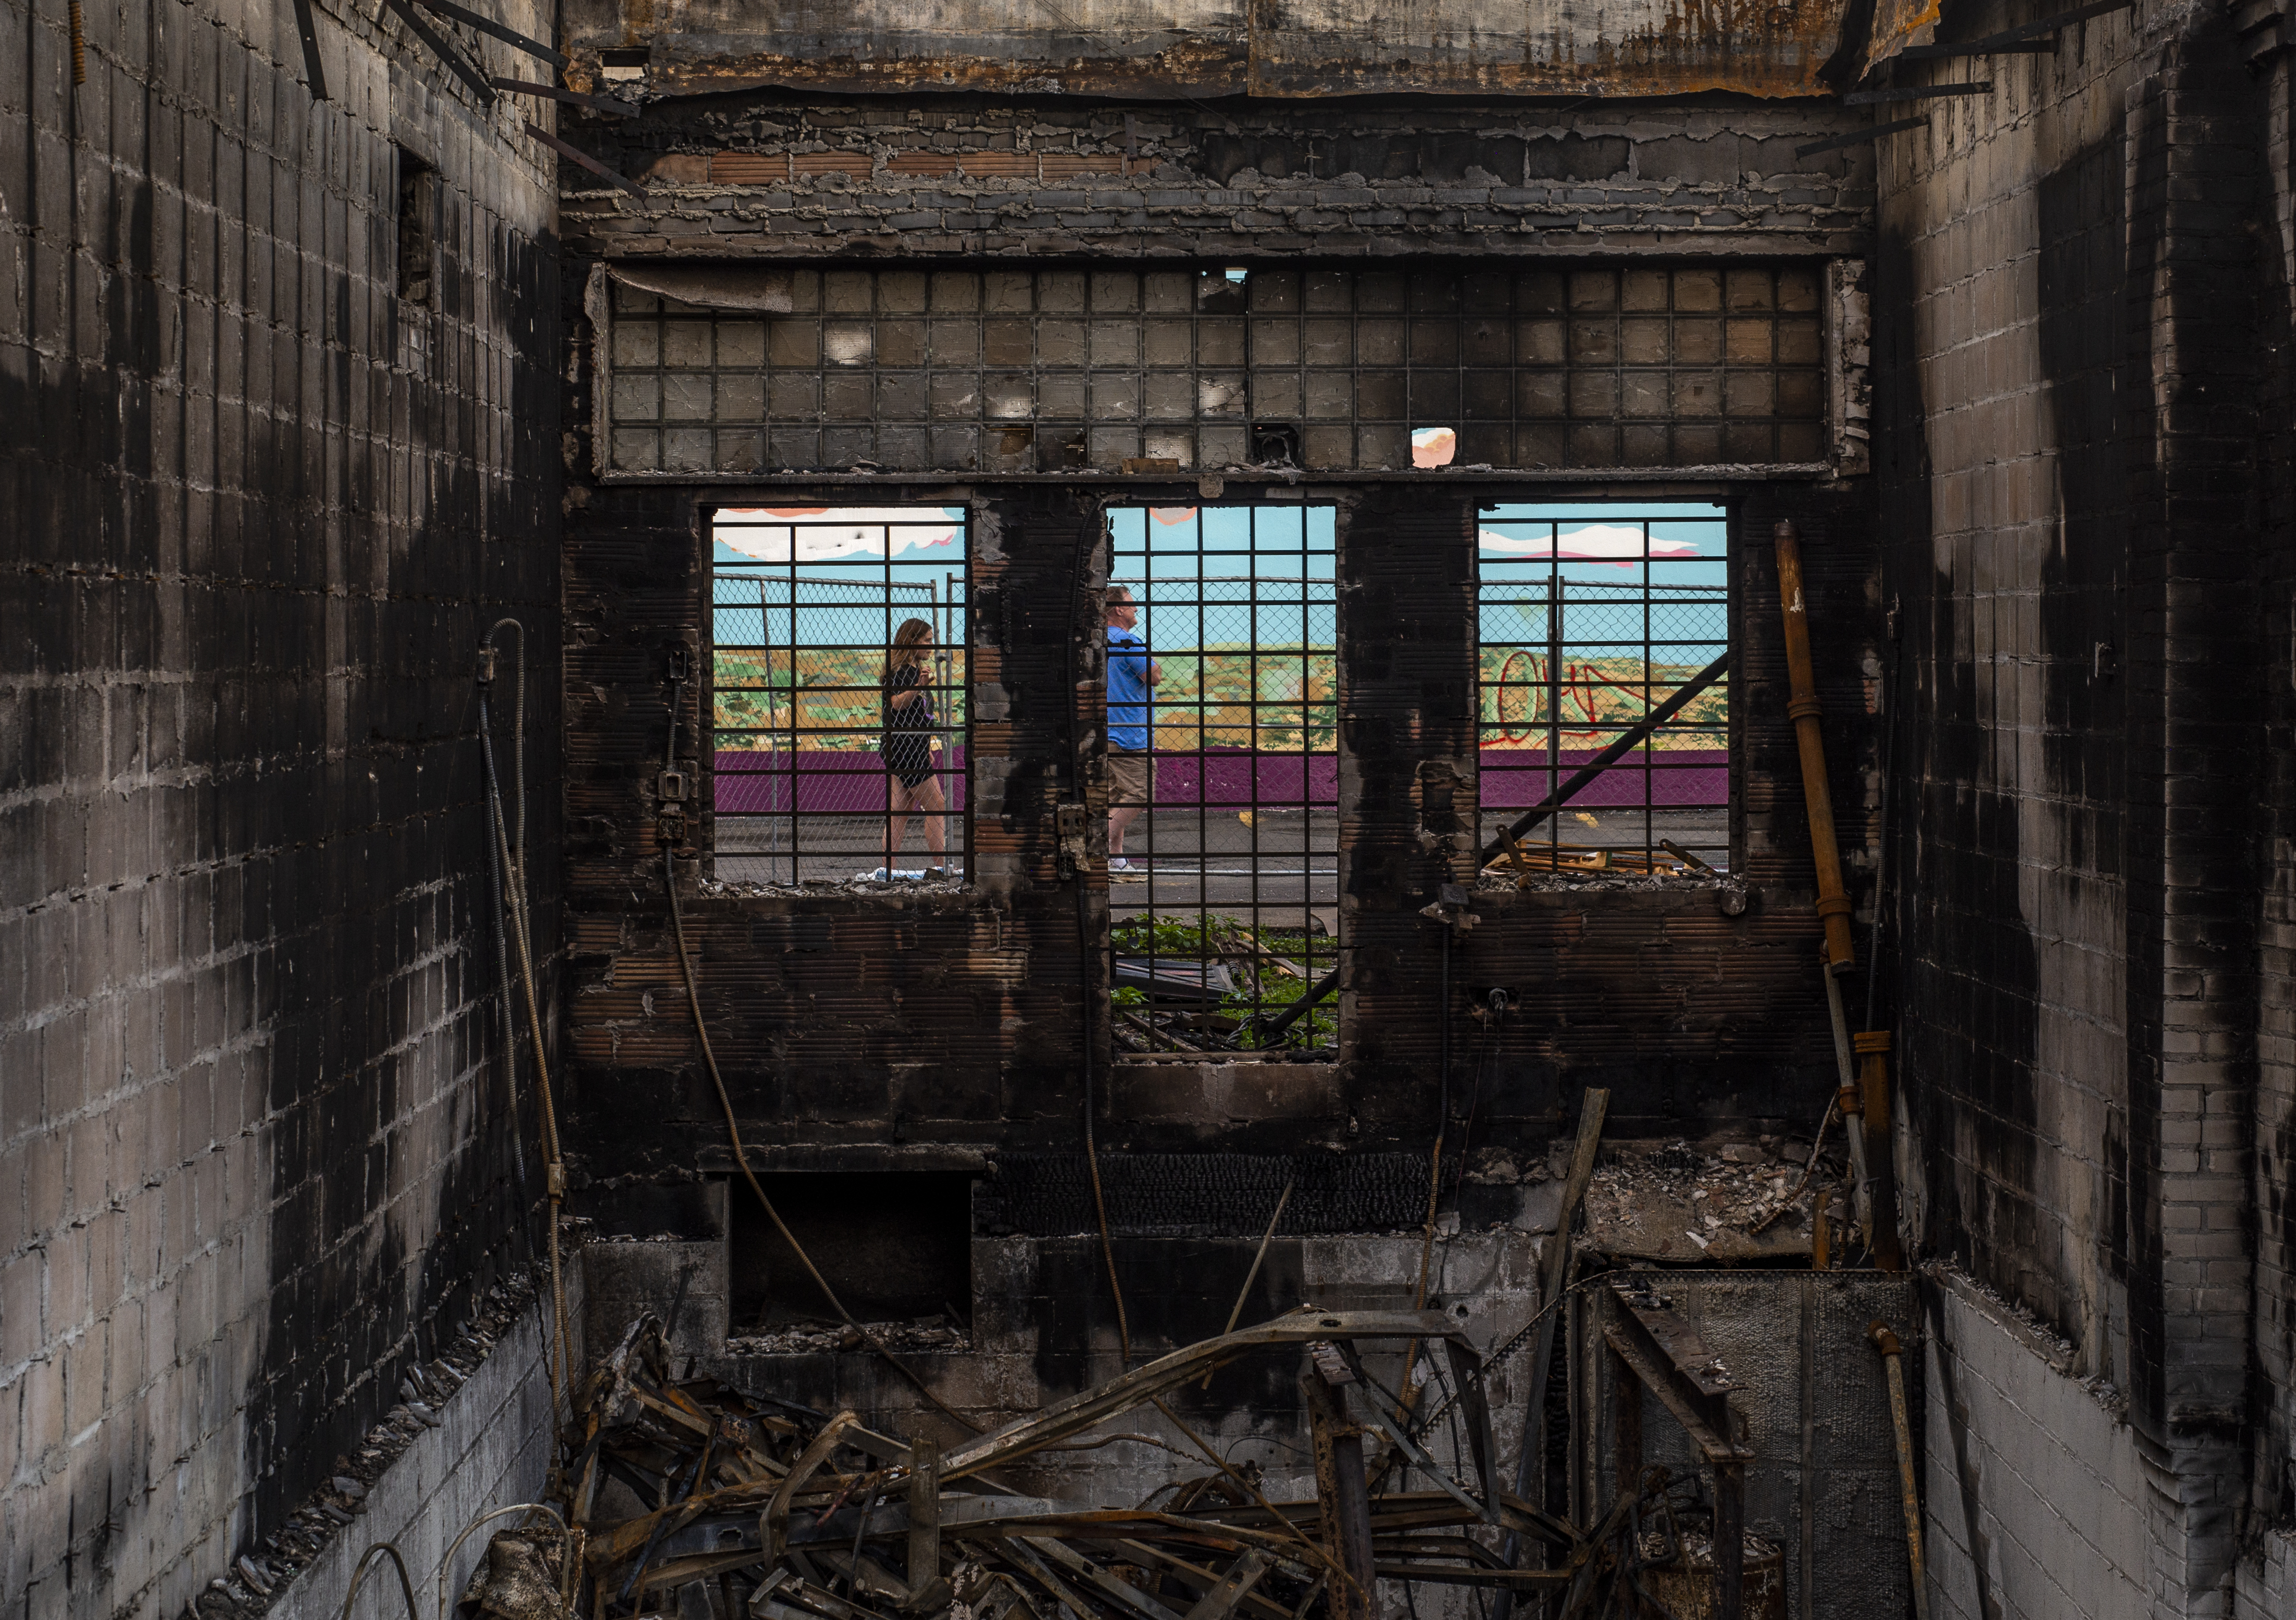 MINNEAPOLIS, MN - JUNE 21: People walk behind a destroyed tobacco store near the Third Police Precinct Station on June 21, 2020 in Minneapolis, Minnesota. (Photo by Stephen Maturen/Getty Images)